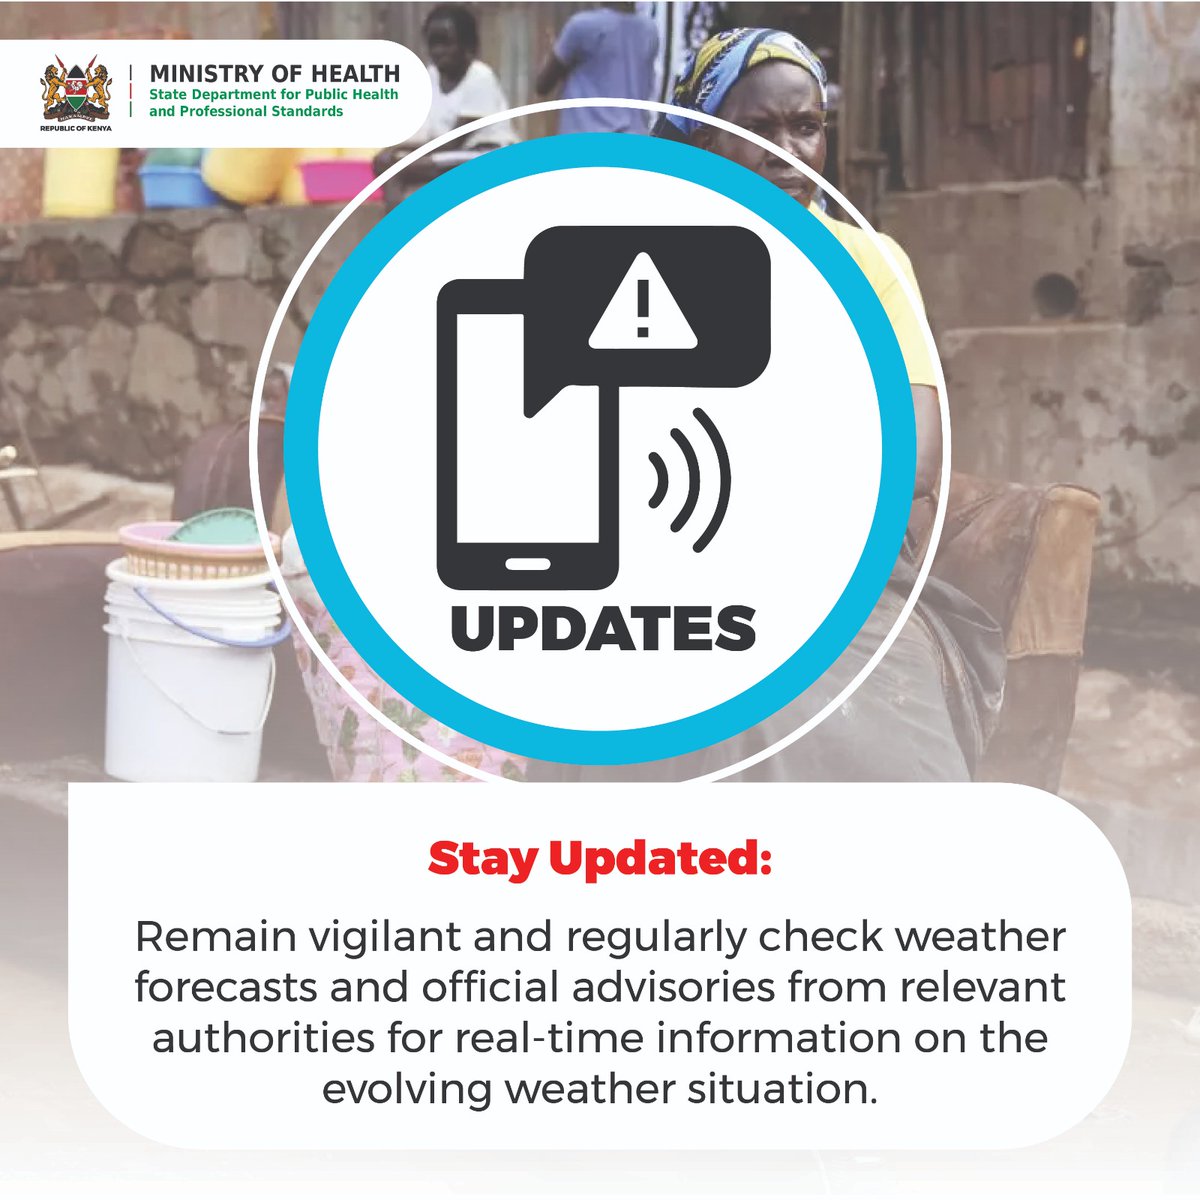 Effective communication strategies during emergencies ensure timely dissemination of vital health information to the public. #PublicHealth SafetyForAll